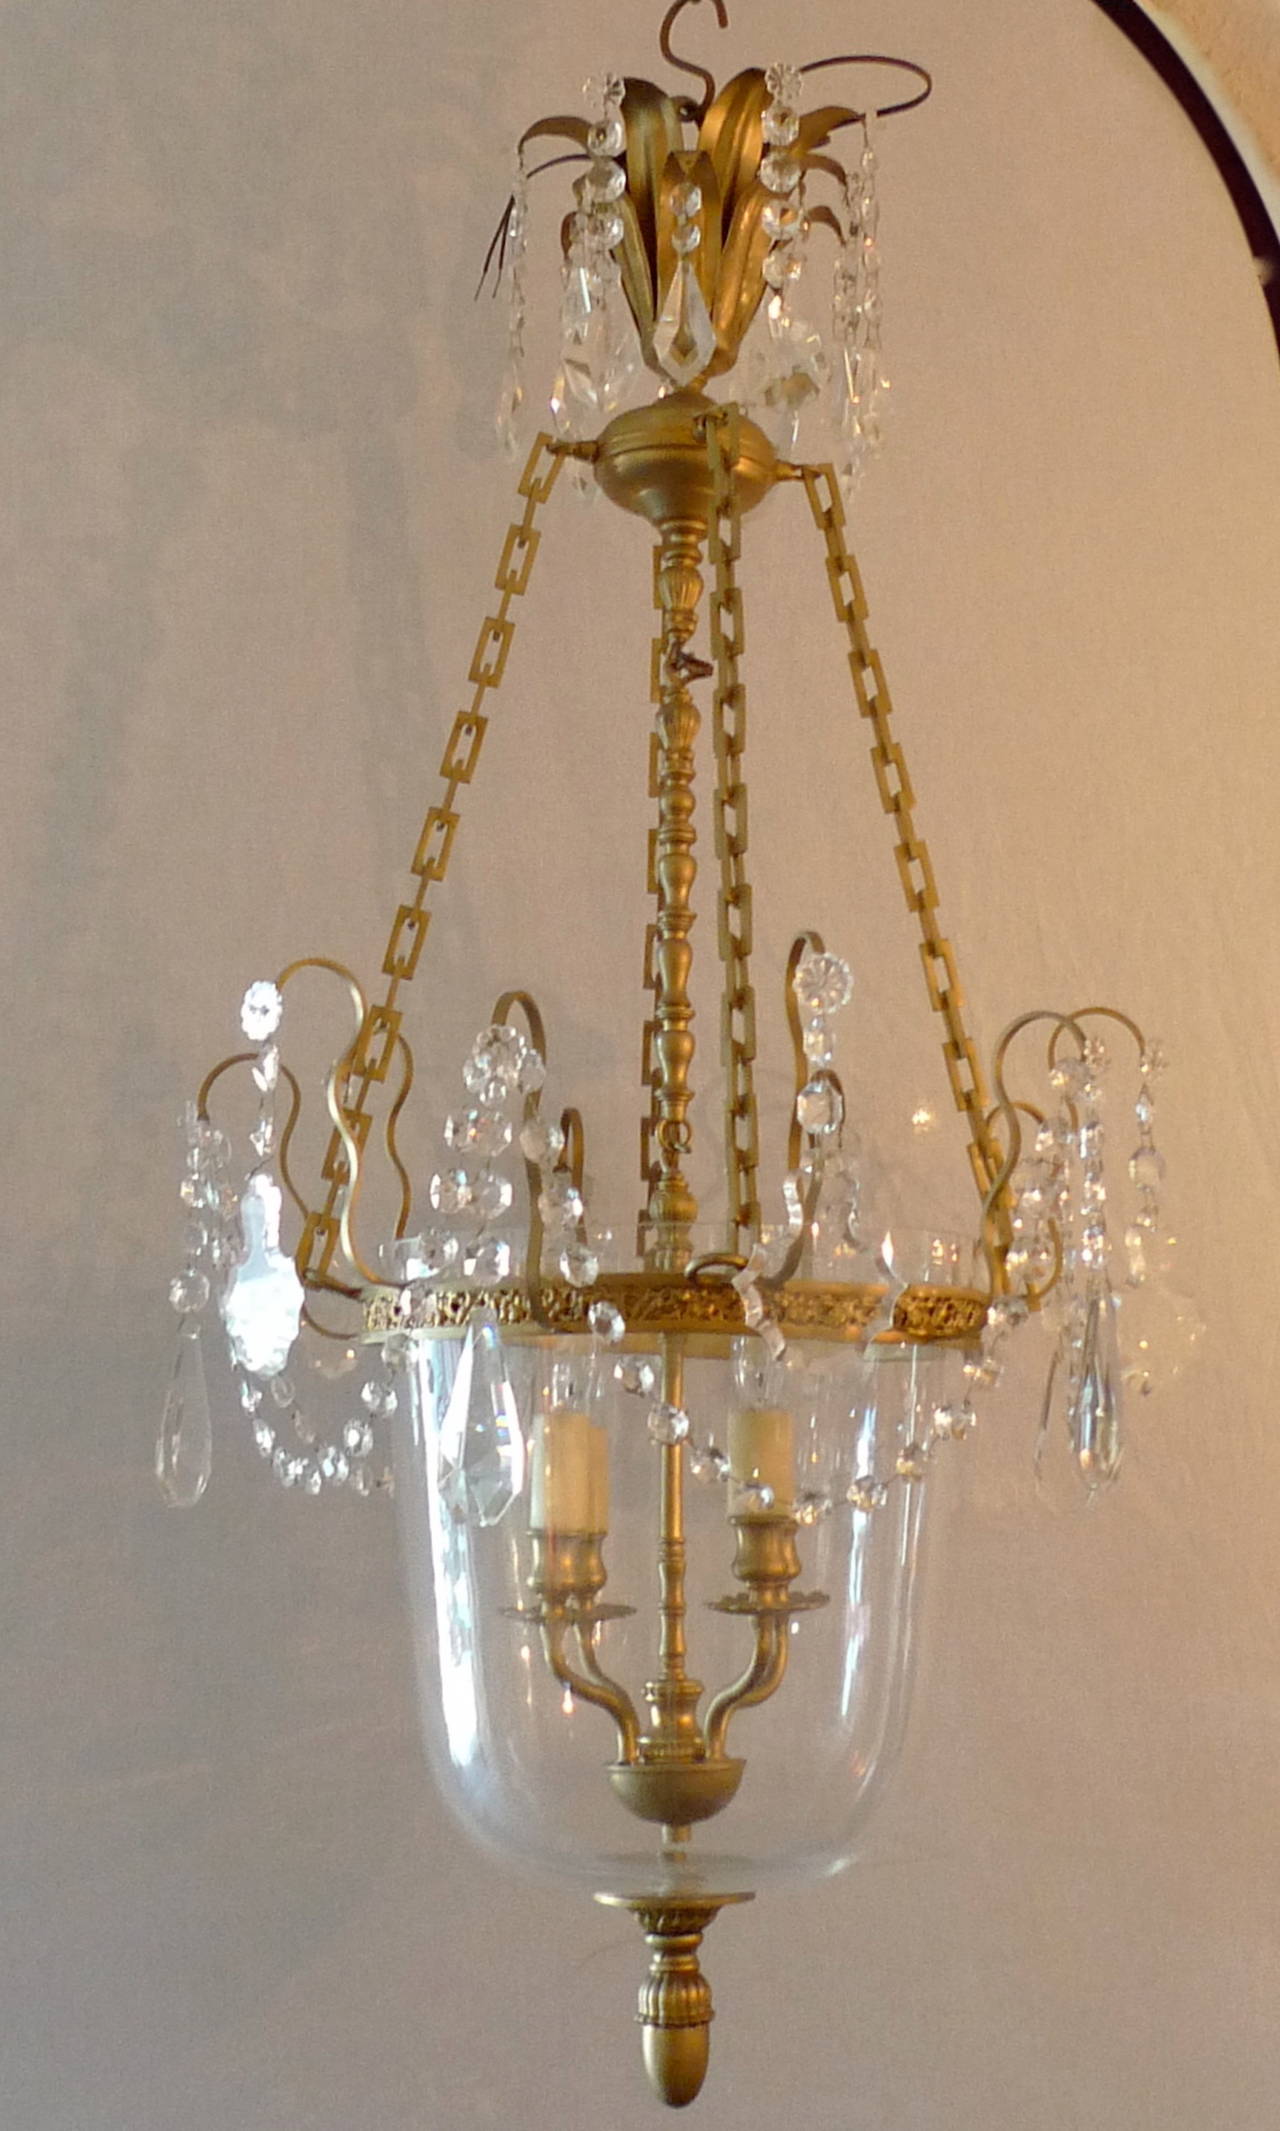 French 1950's bell jar chandelier with crystal, gold-leaf metal and 4 lights.